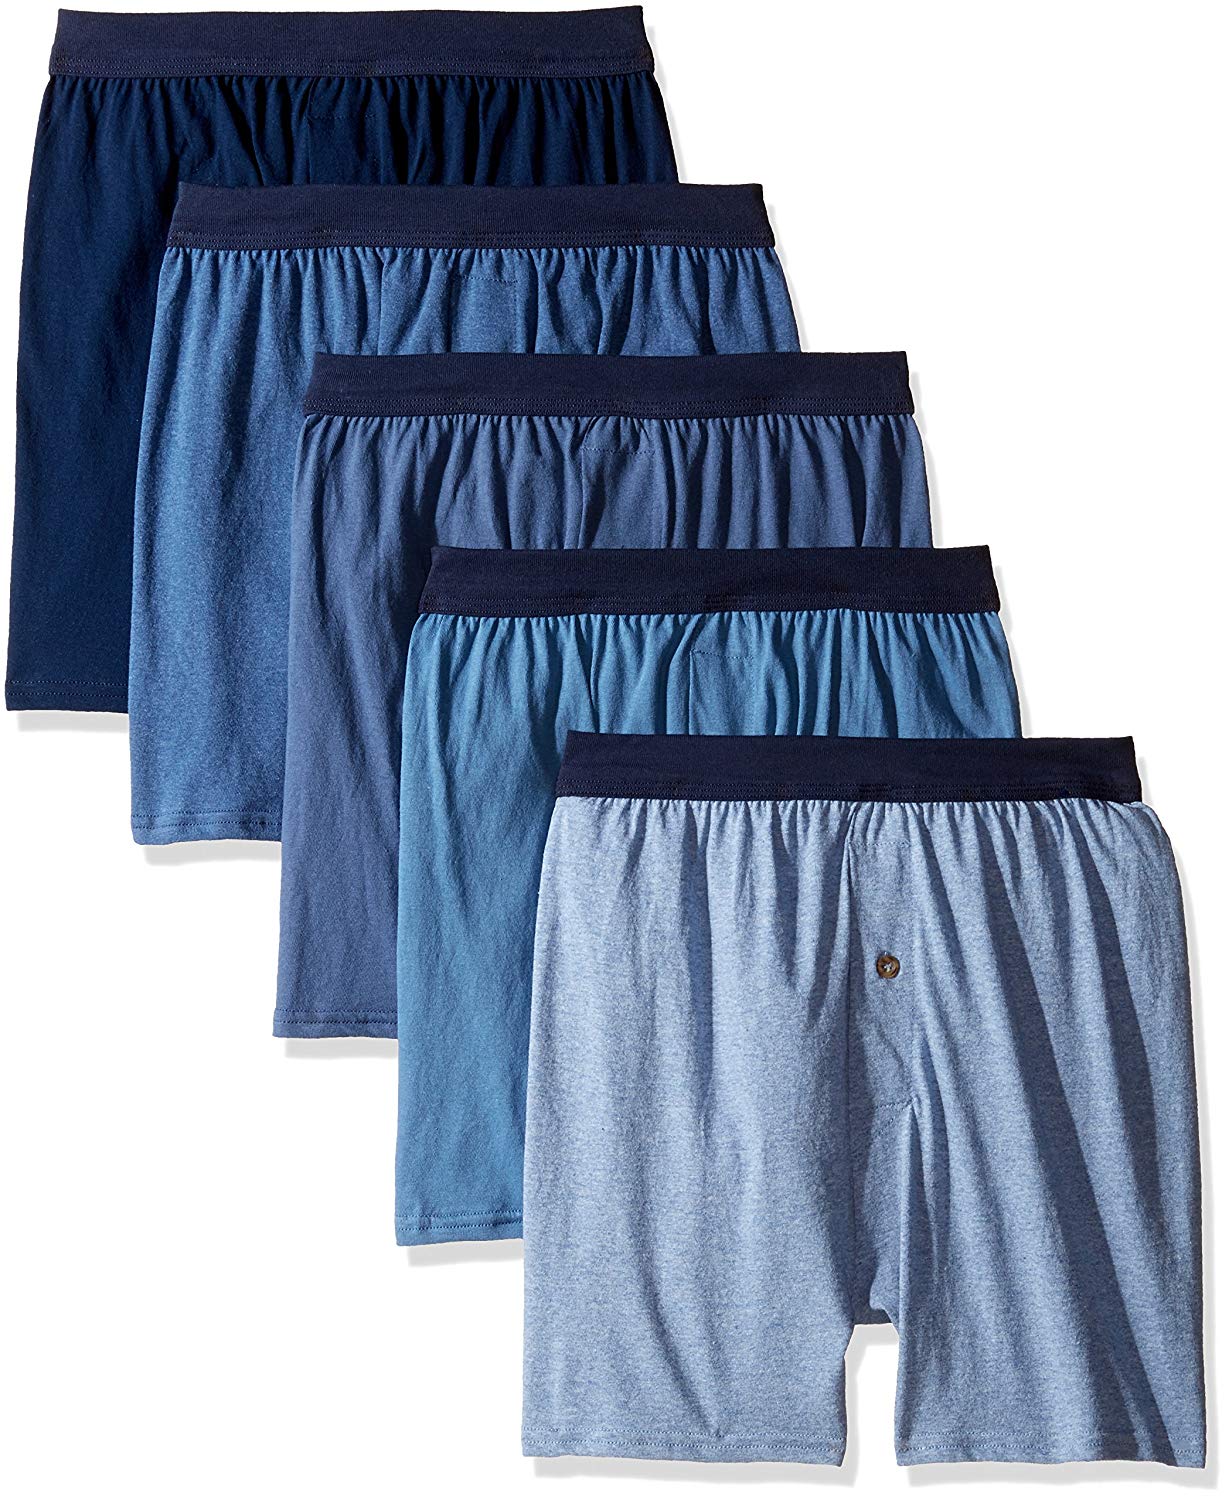 MKCBX5-Hanes Men's Tagless ComfortSoft Knit Boxers with, Assorted, Size ...